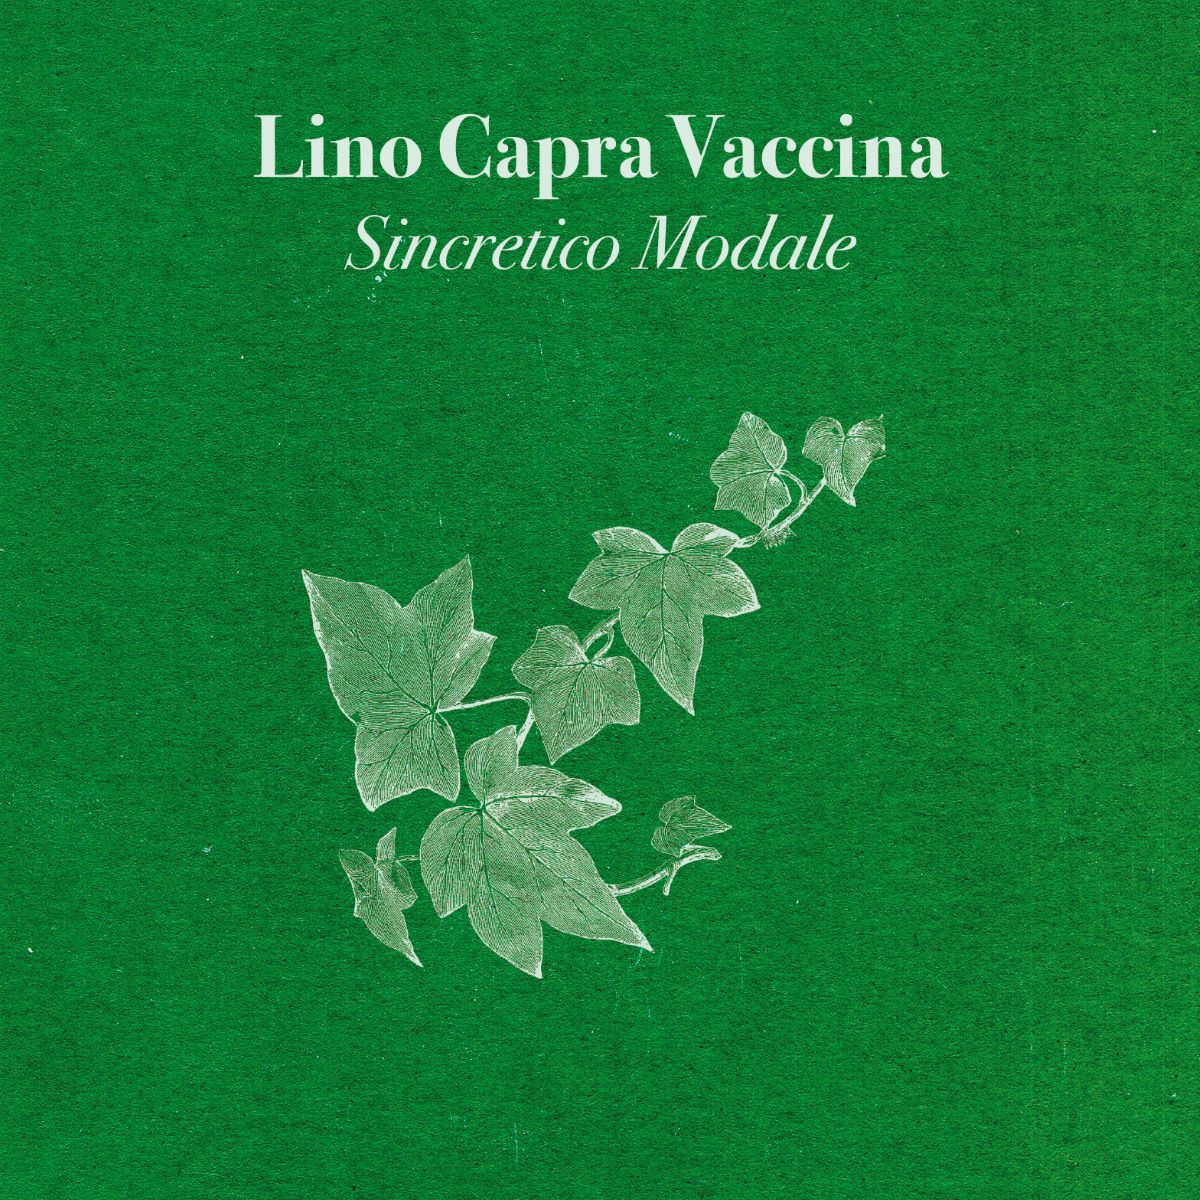 CAPRA VACCINA LINO - Sincretico Modale (limited hand numbered first edition)